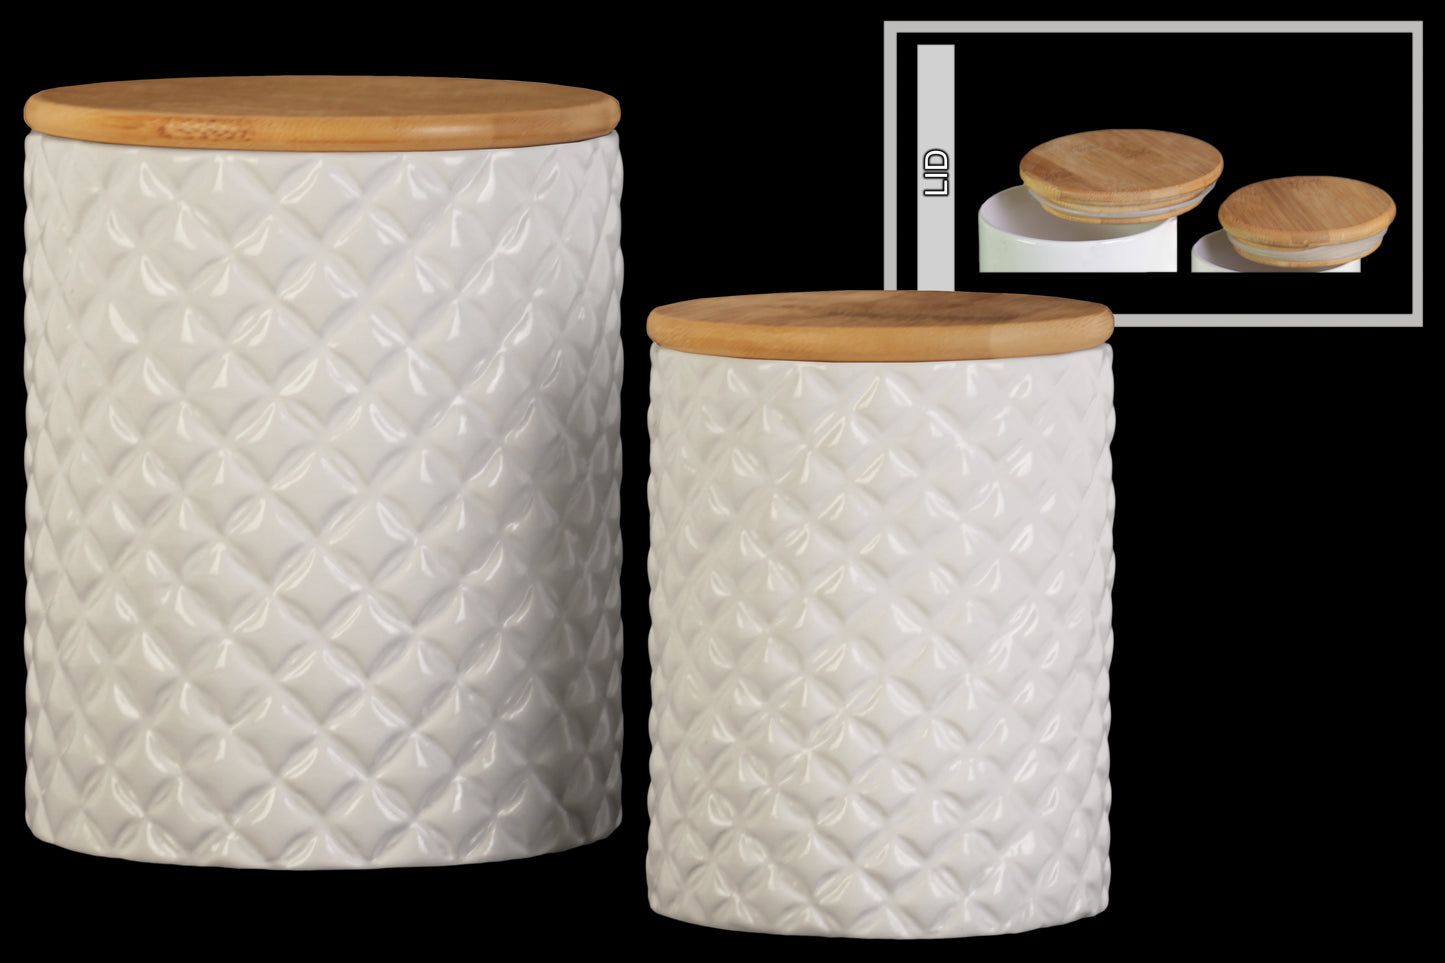 Ceramic Round Canister with Lattice Diamond Design Body and Bamboo Lid, Set of 2